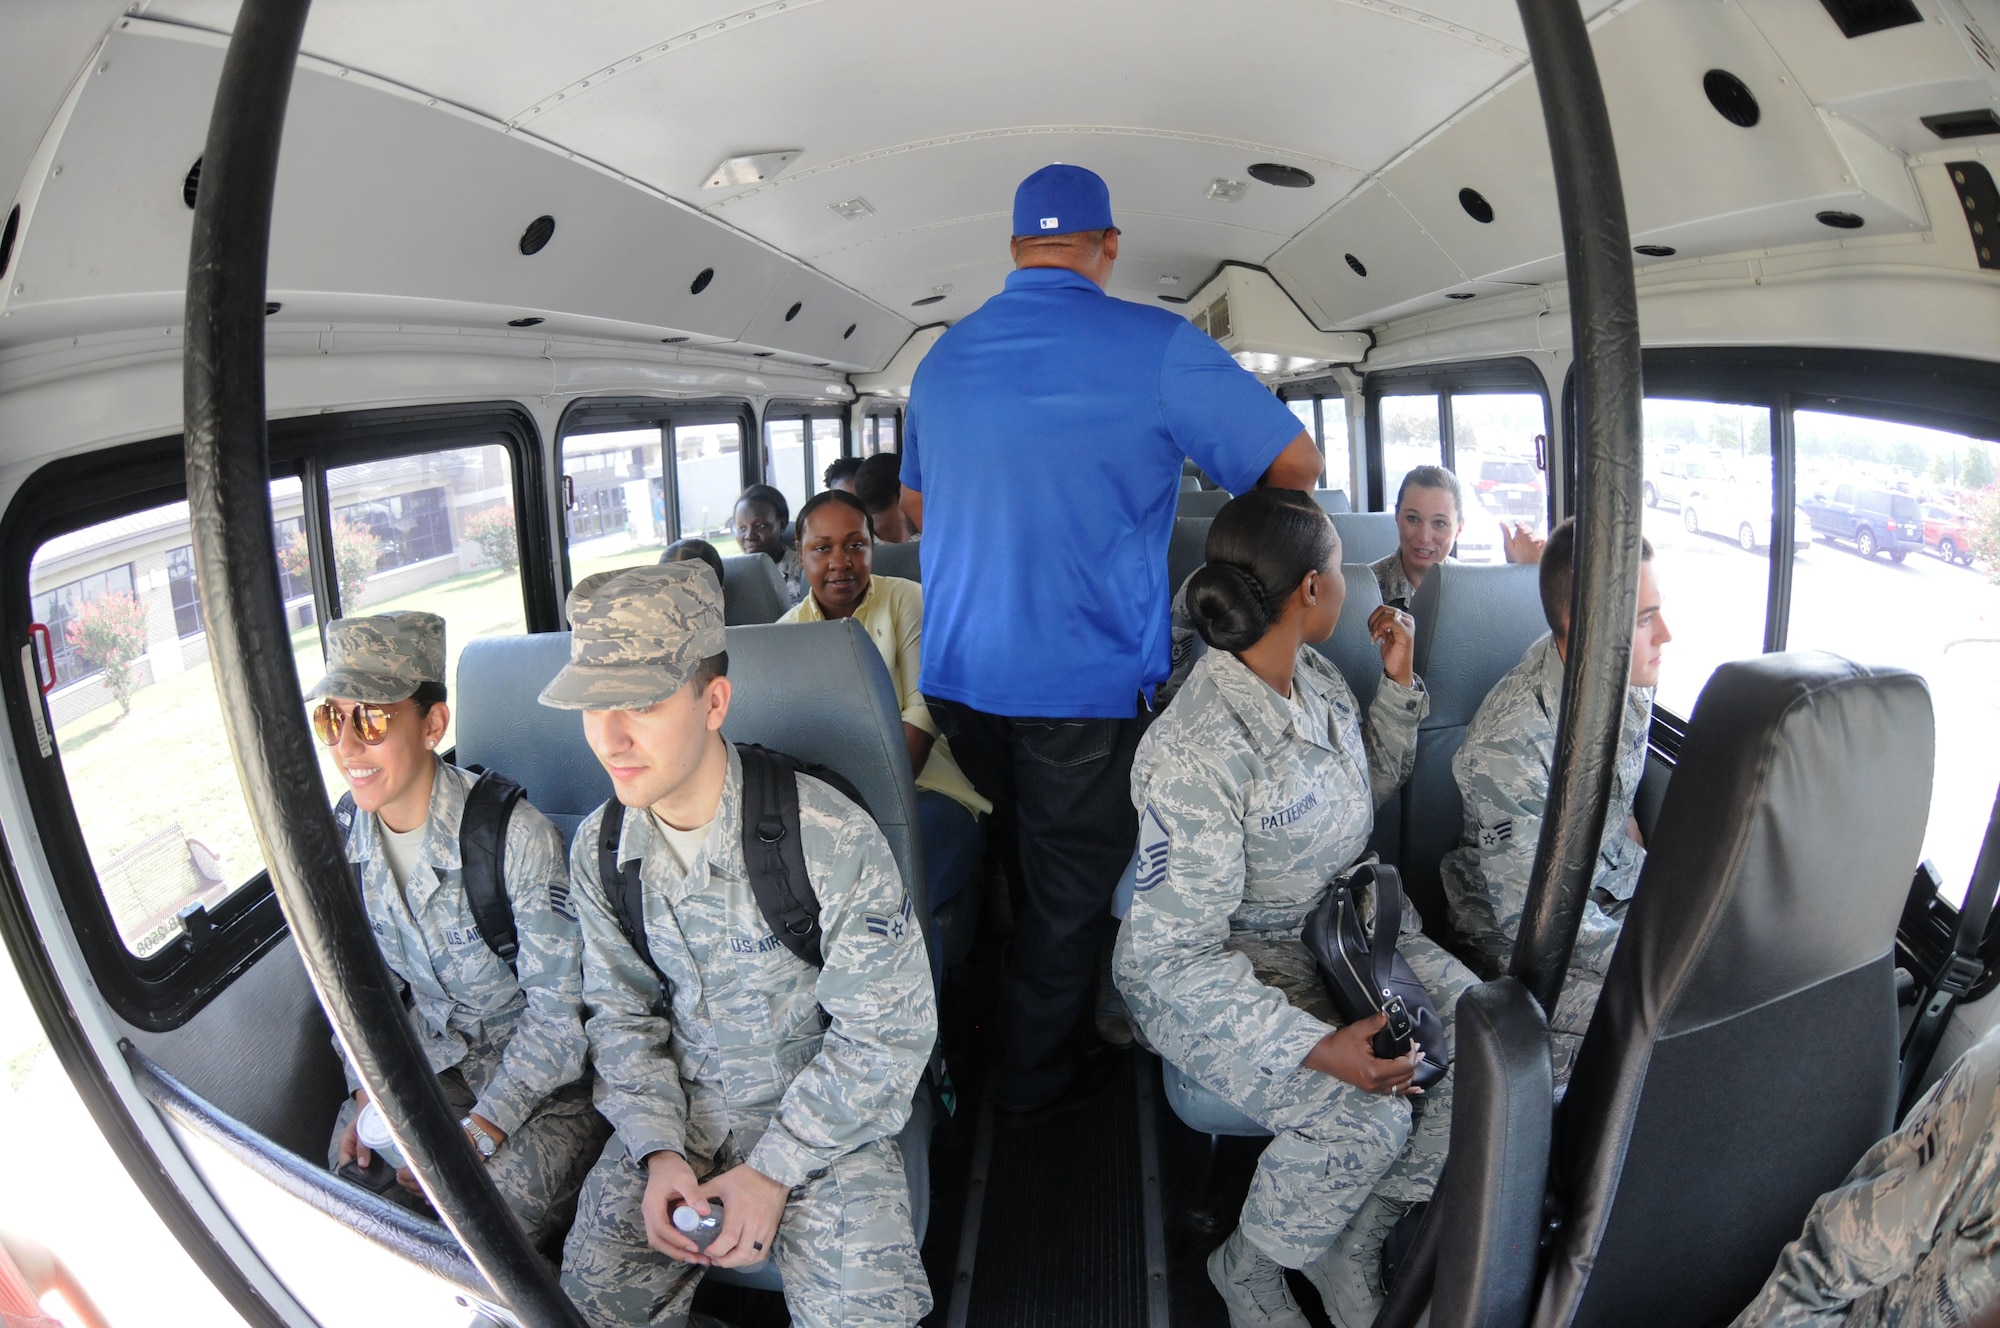 Keesler personnel board a bus at the Base Exchange to evacuate during a hurricane exercise Aug. 4, 2016, on Keesler Air Force Base, Miss. The purpose of the exercise was to prepare Keesler for the current hurricane season. (U.S. Air Force photo by Kemberly Groue/Released)